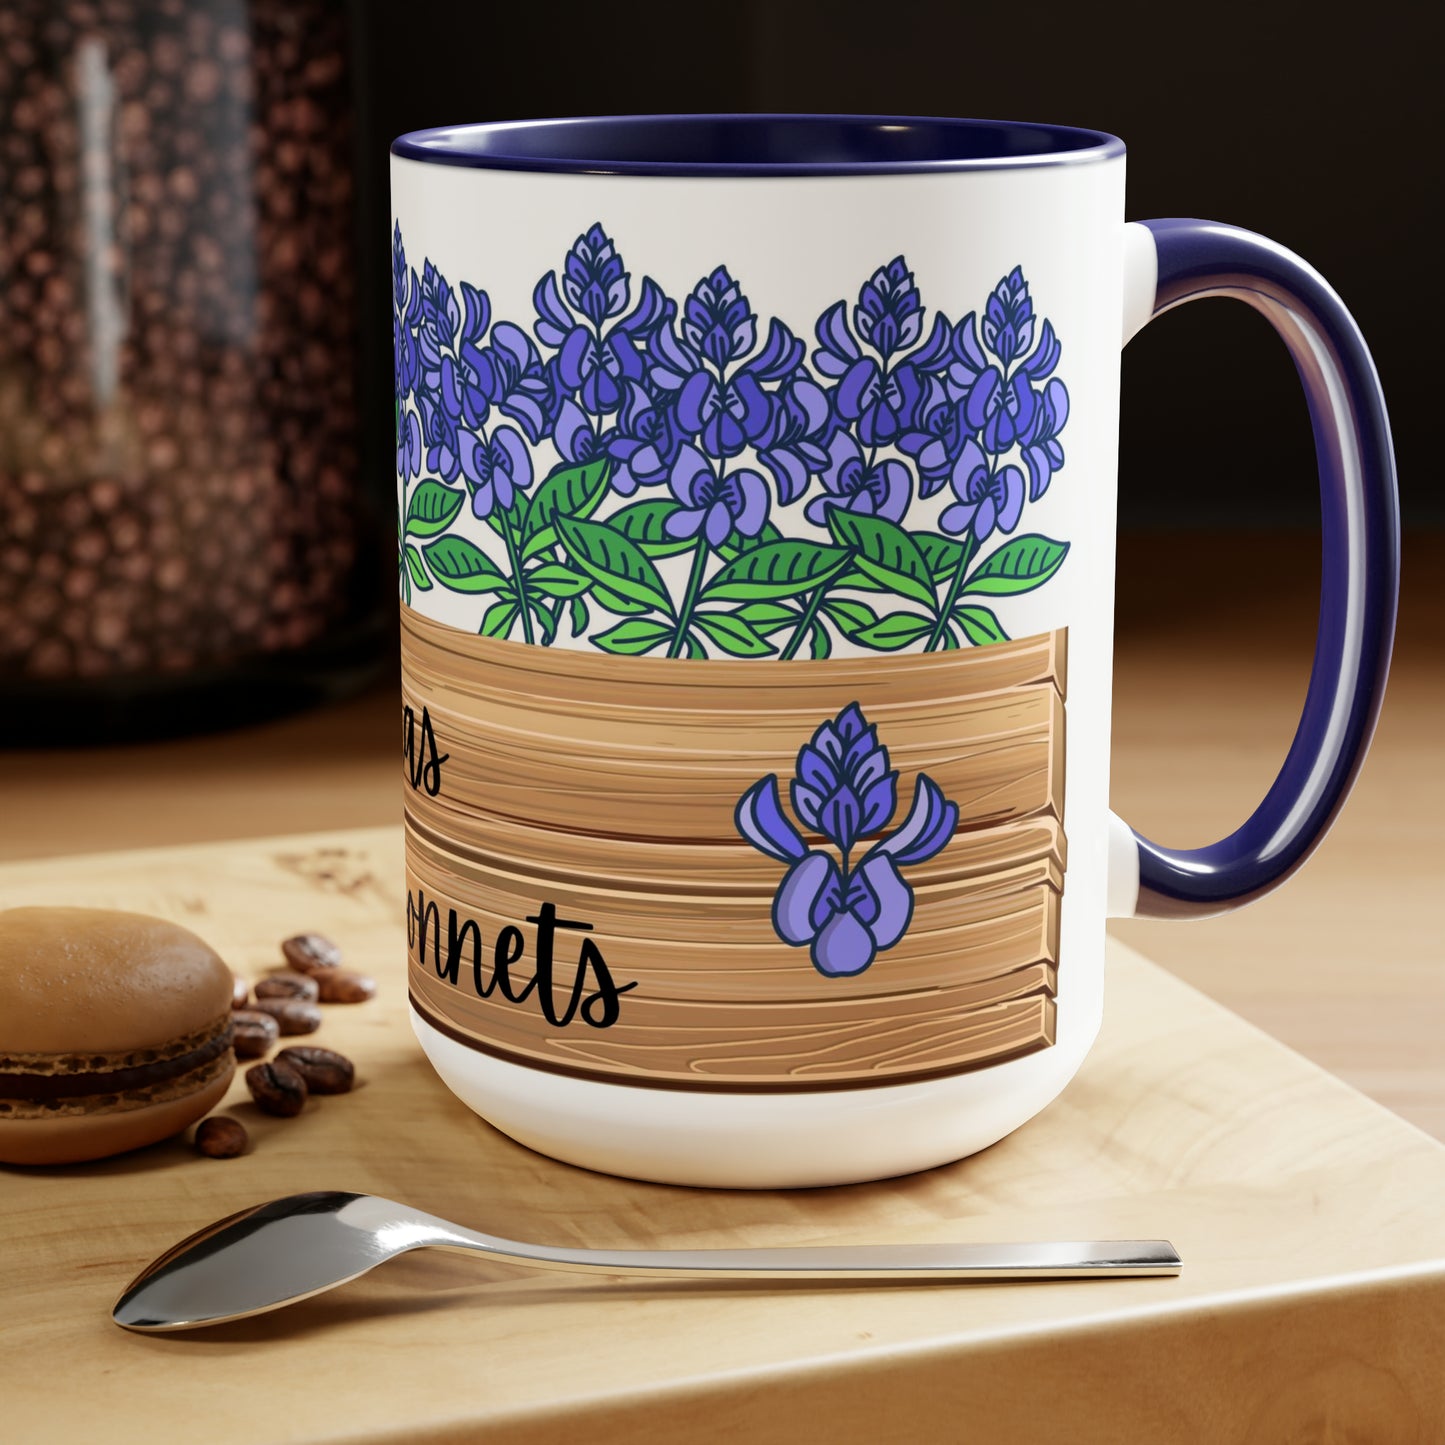 Texas Bluebonnets Two-Tone Coffee Mugs 15oz, Coffee Mug, Bluebonnets Coffee Mug, Texas Coffee Mug, Gifts Under 20, Gifts For Her, Bluebonnet